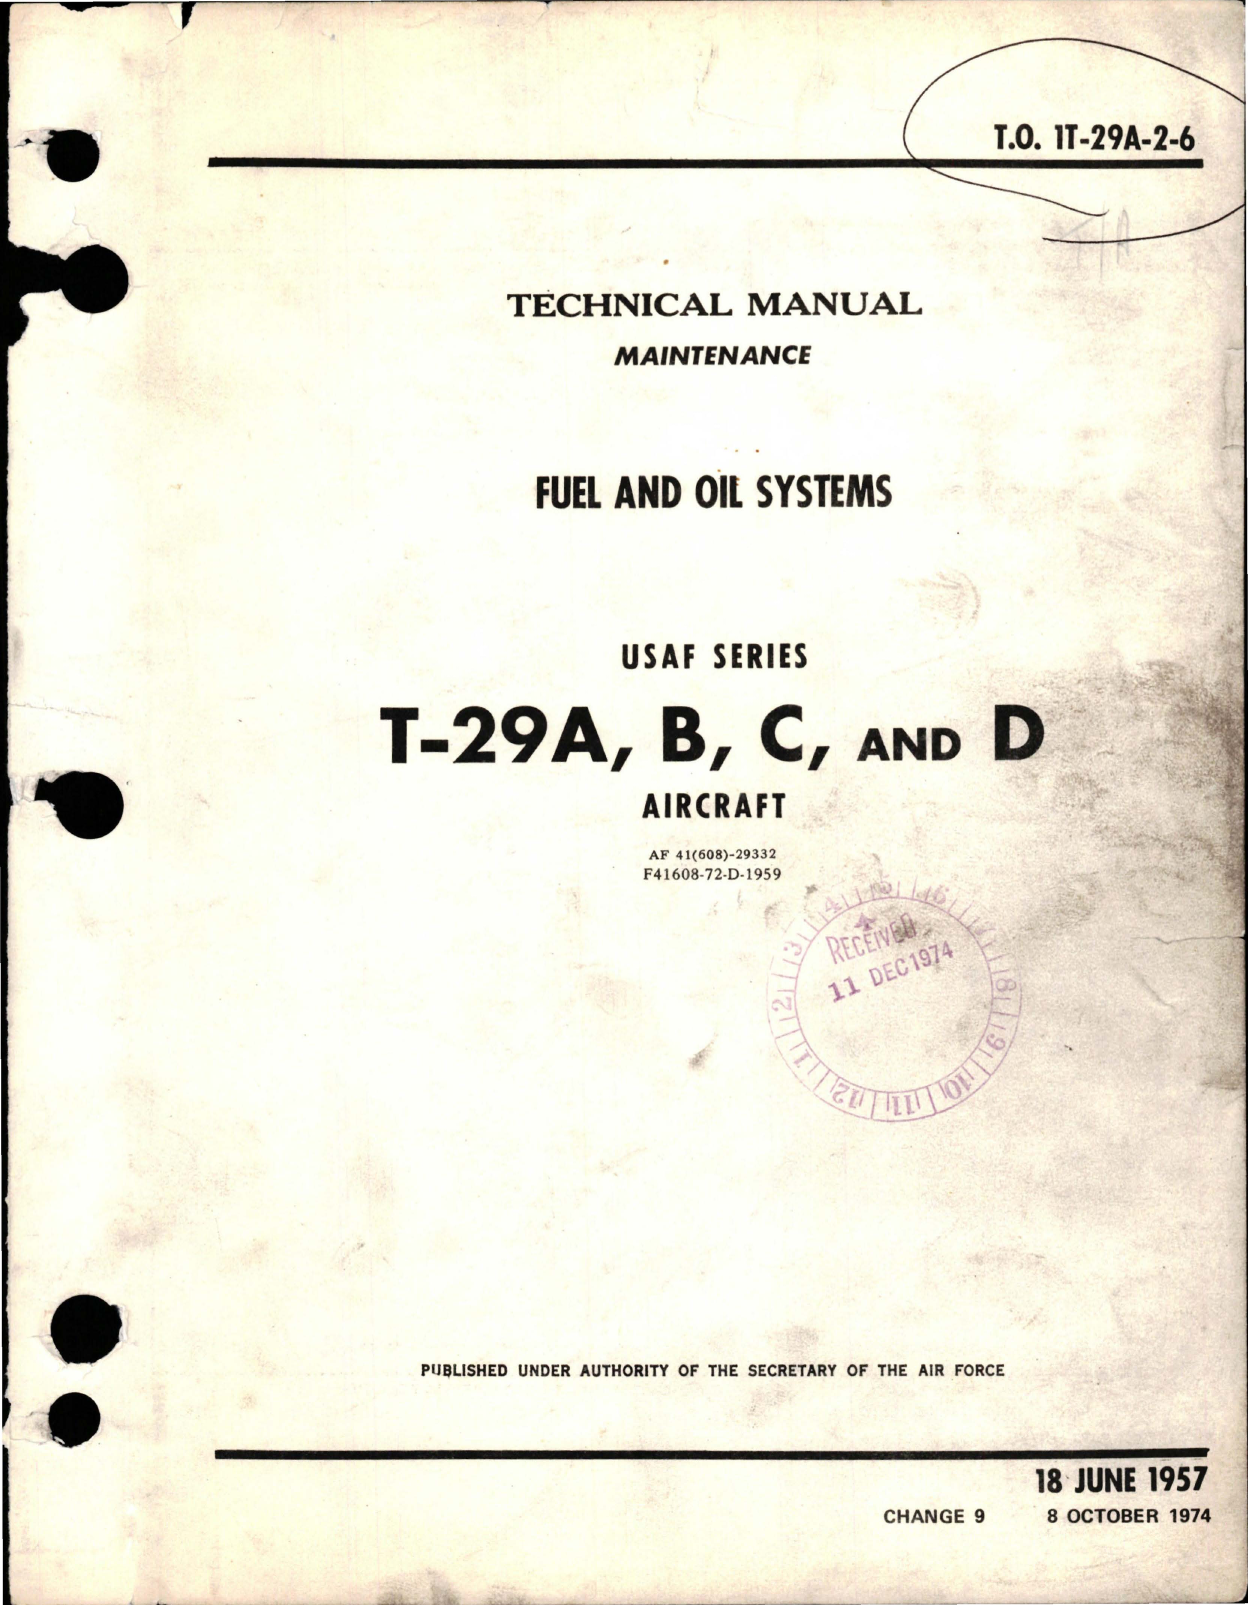 Sample page 1 from AirCorps Library document: Maintenance Manual for Fuel and Oil Systems for T-29A, T-29B, T-29C, and T-29D